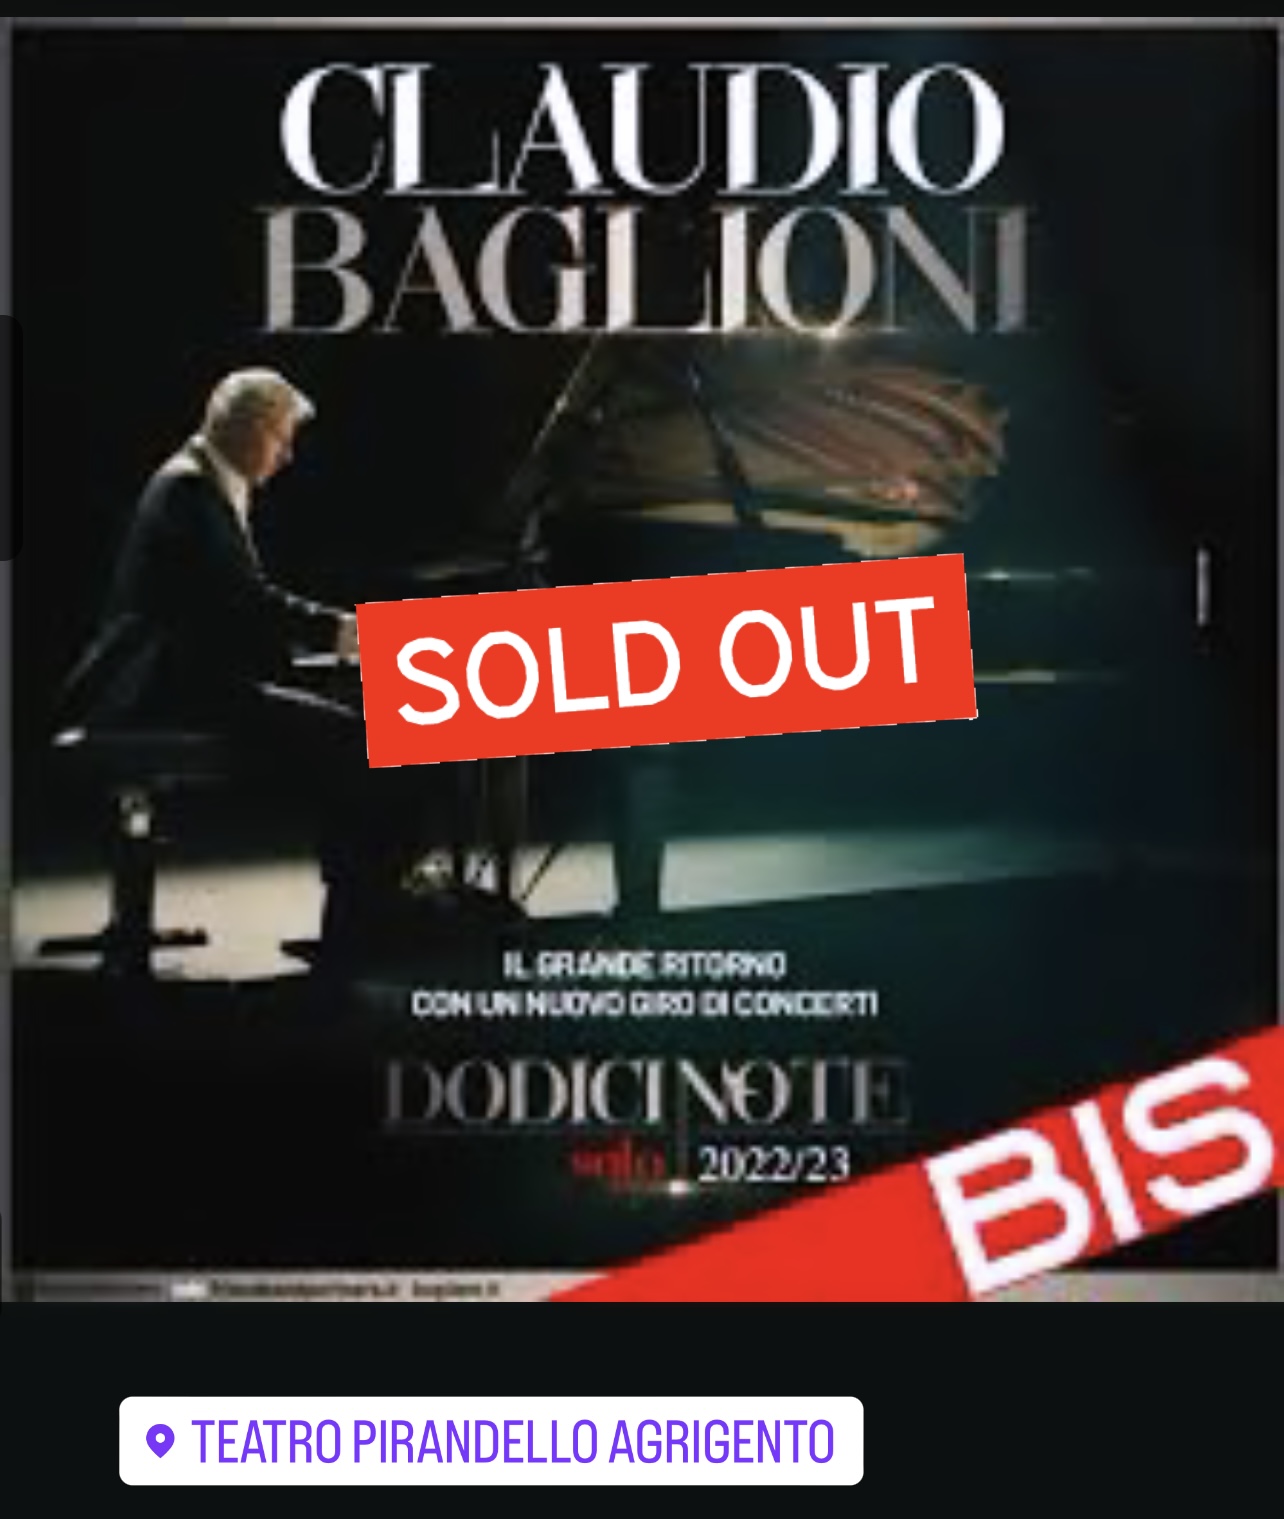 Baglioni sold out